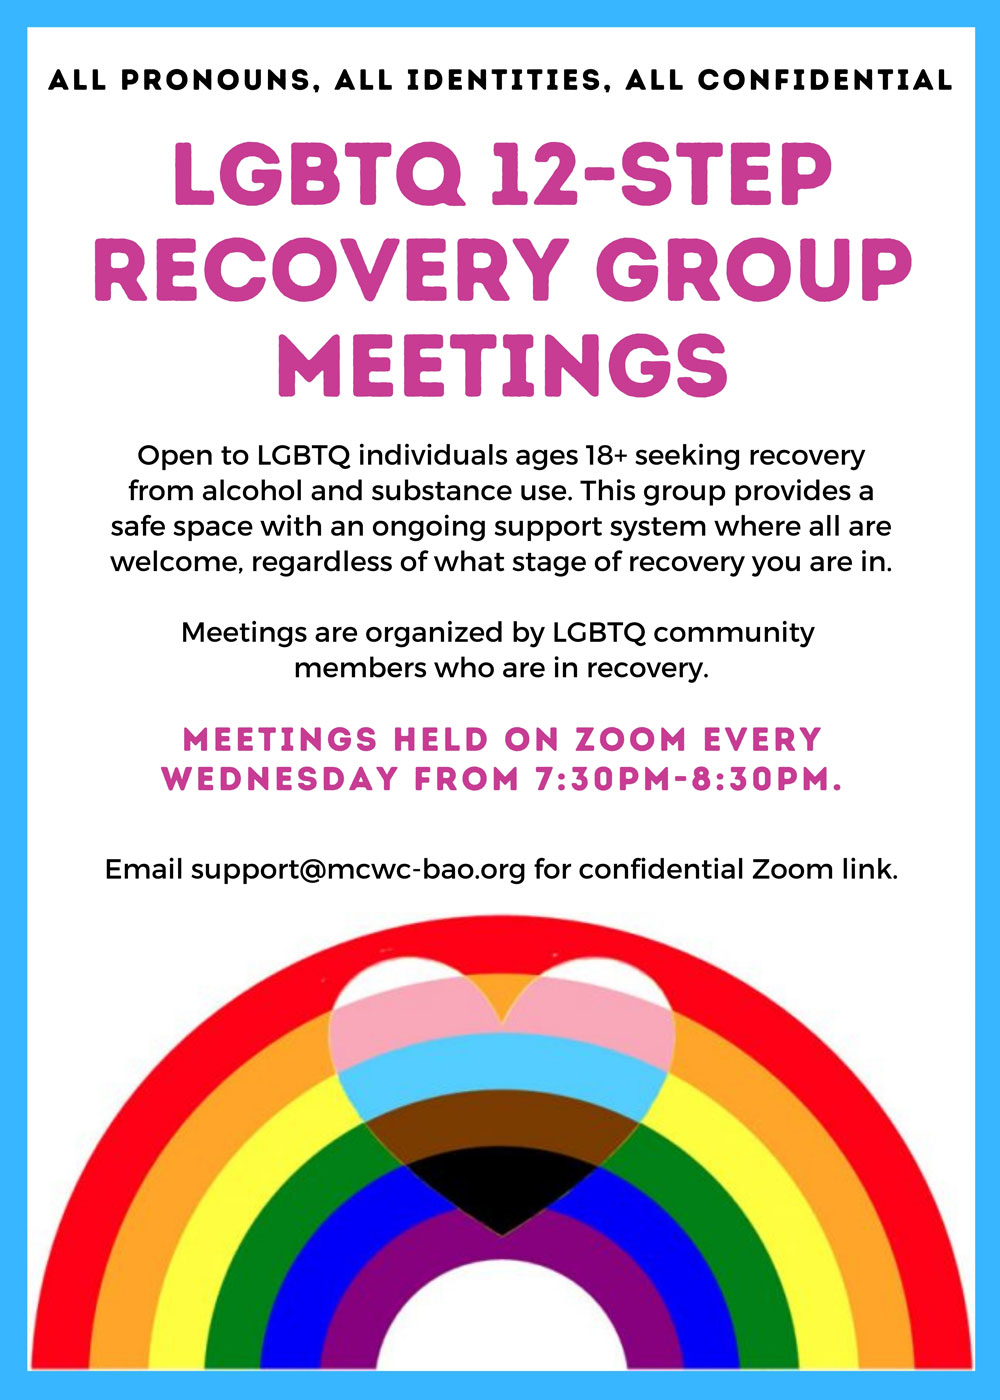 LGBTQ Recovery Group Meeting Flyer. All information is included in page text.